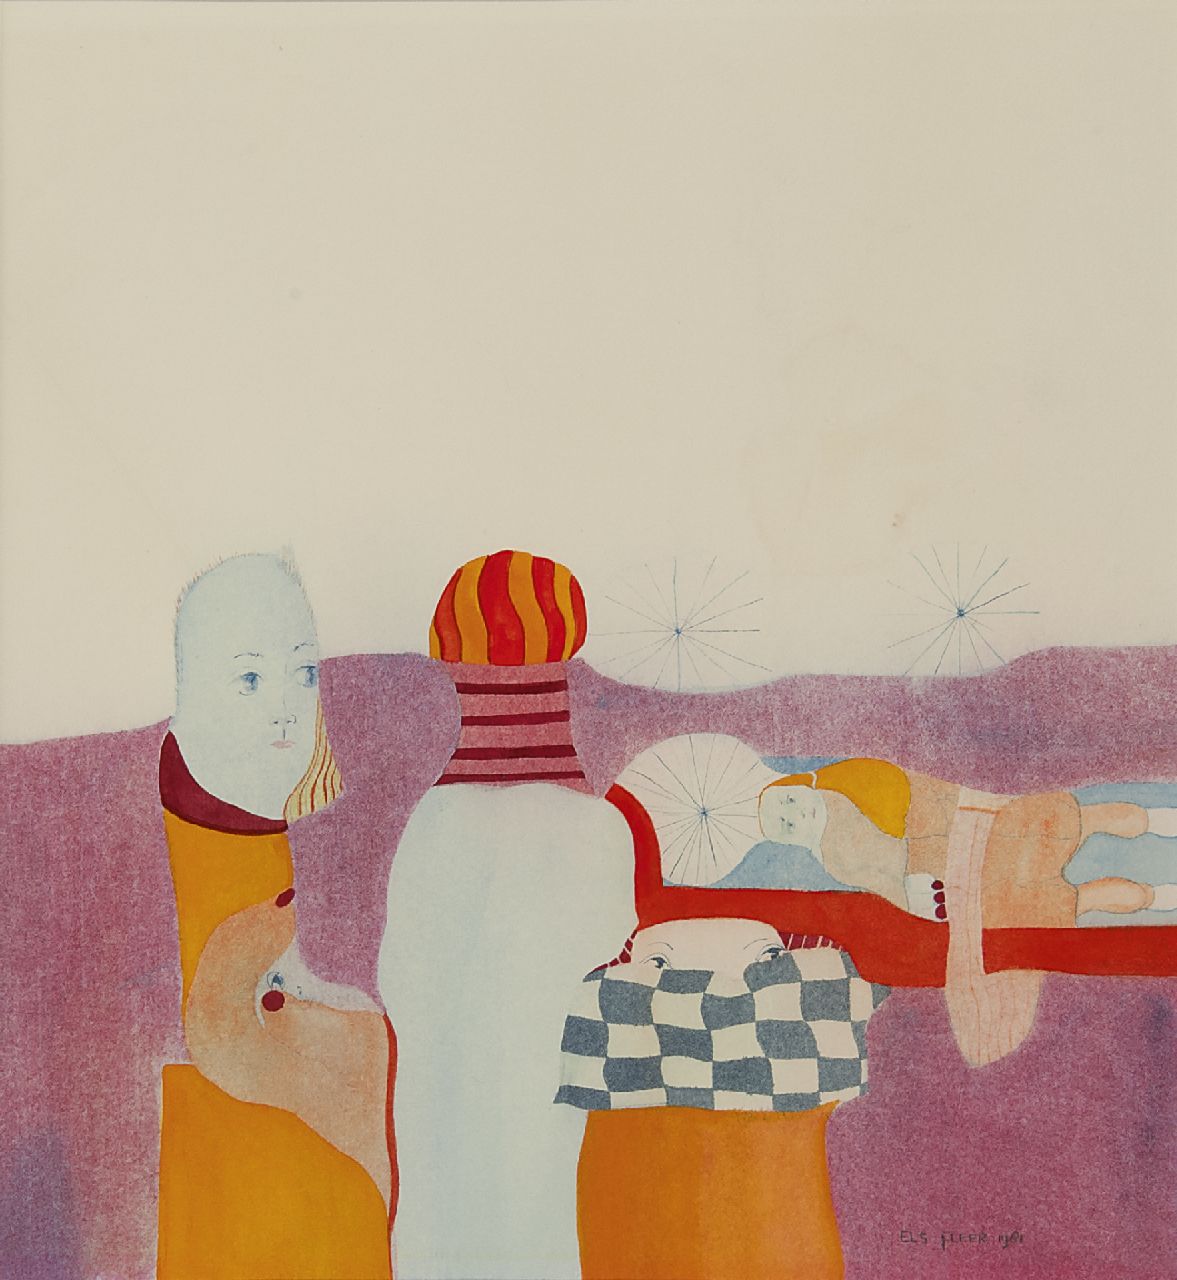 Els Fleer | Confusion, watercolour on paper, 46.3 x 44.2 cm, signed l.r. and dated 1981